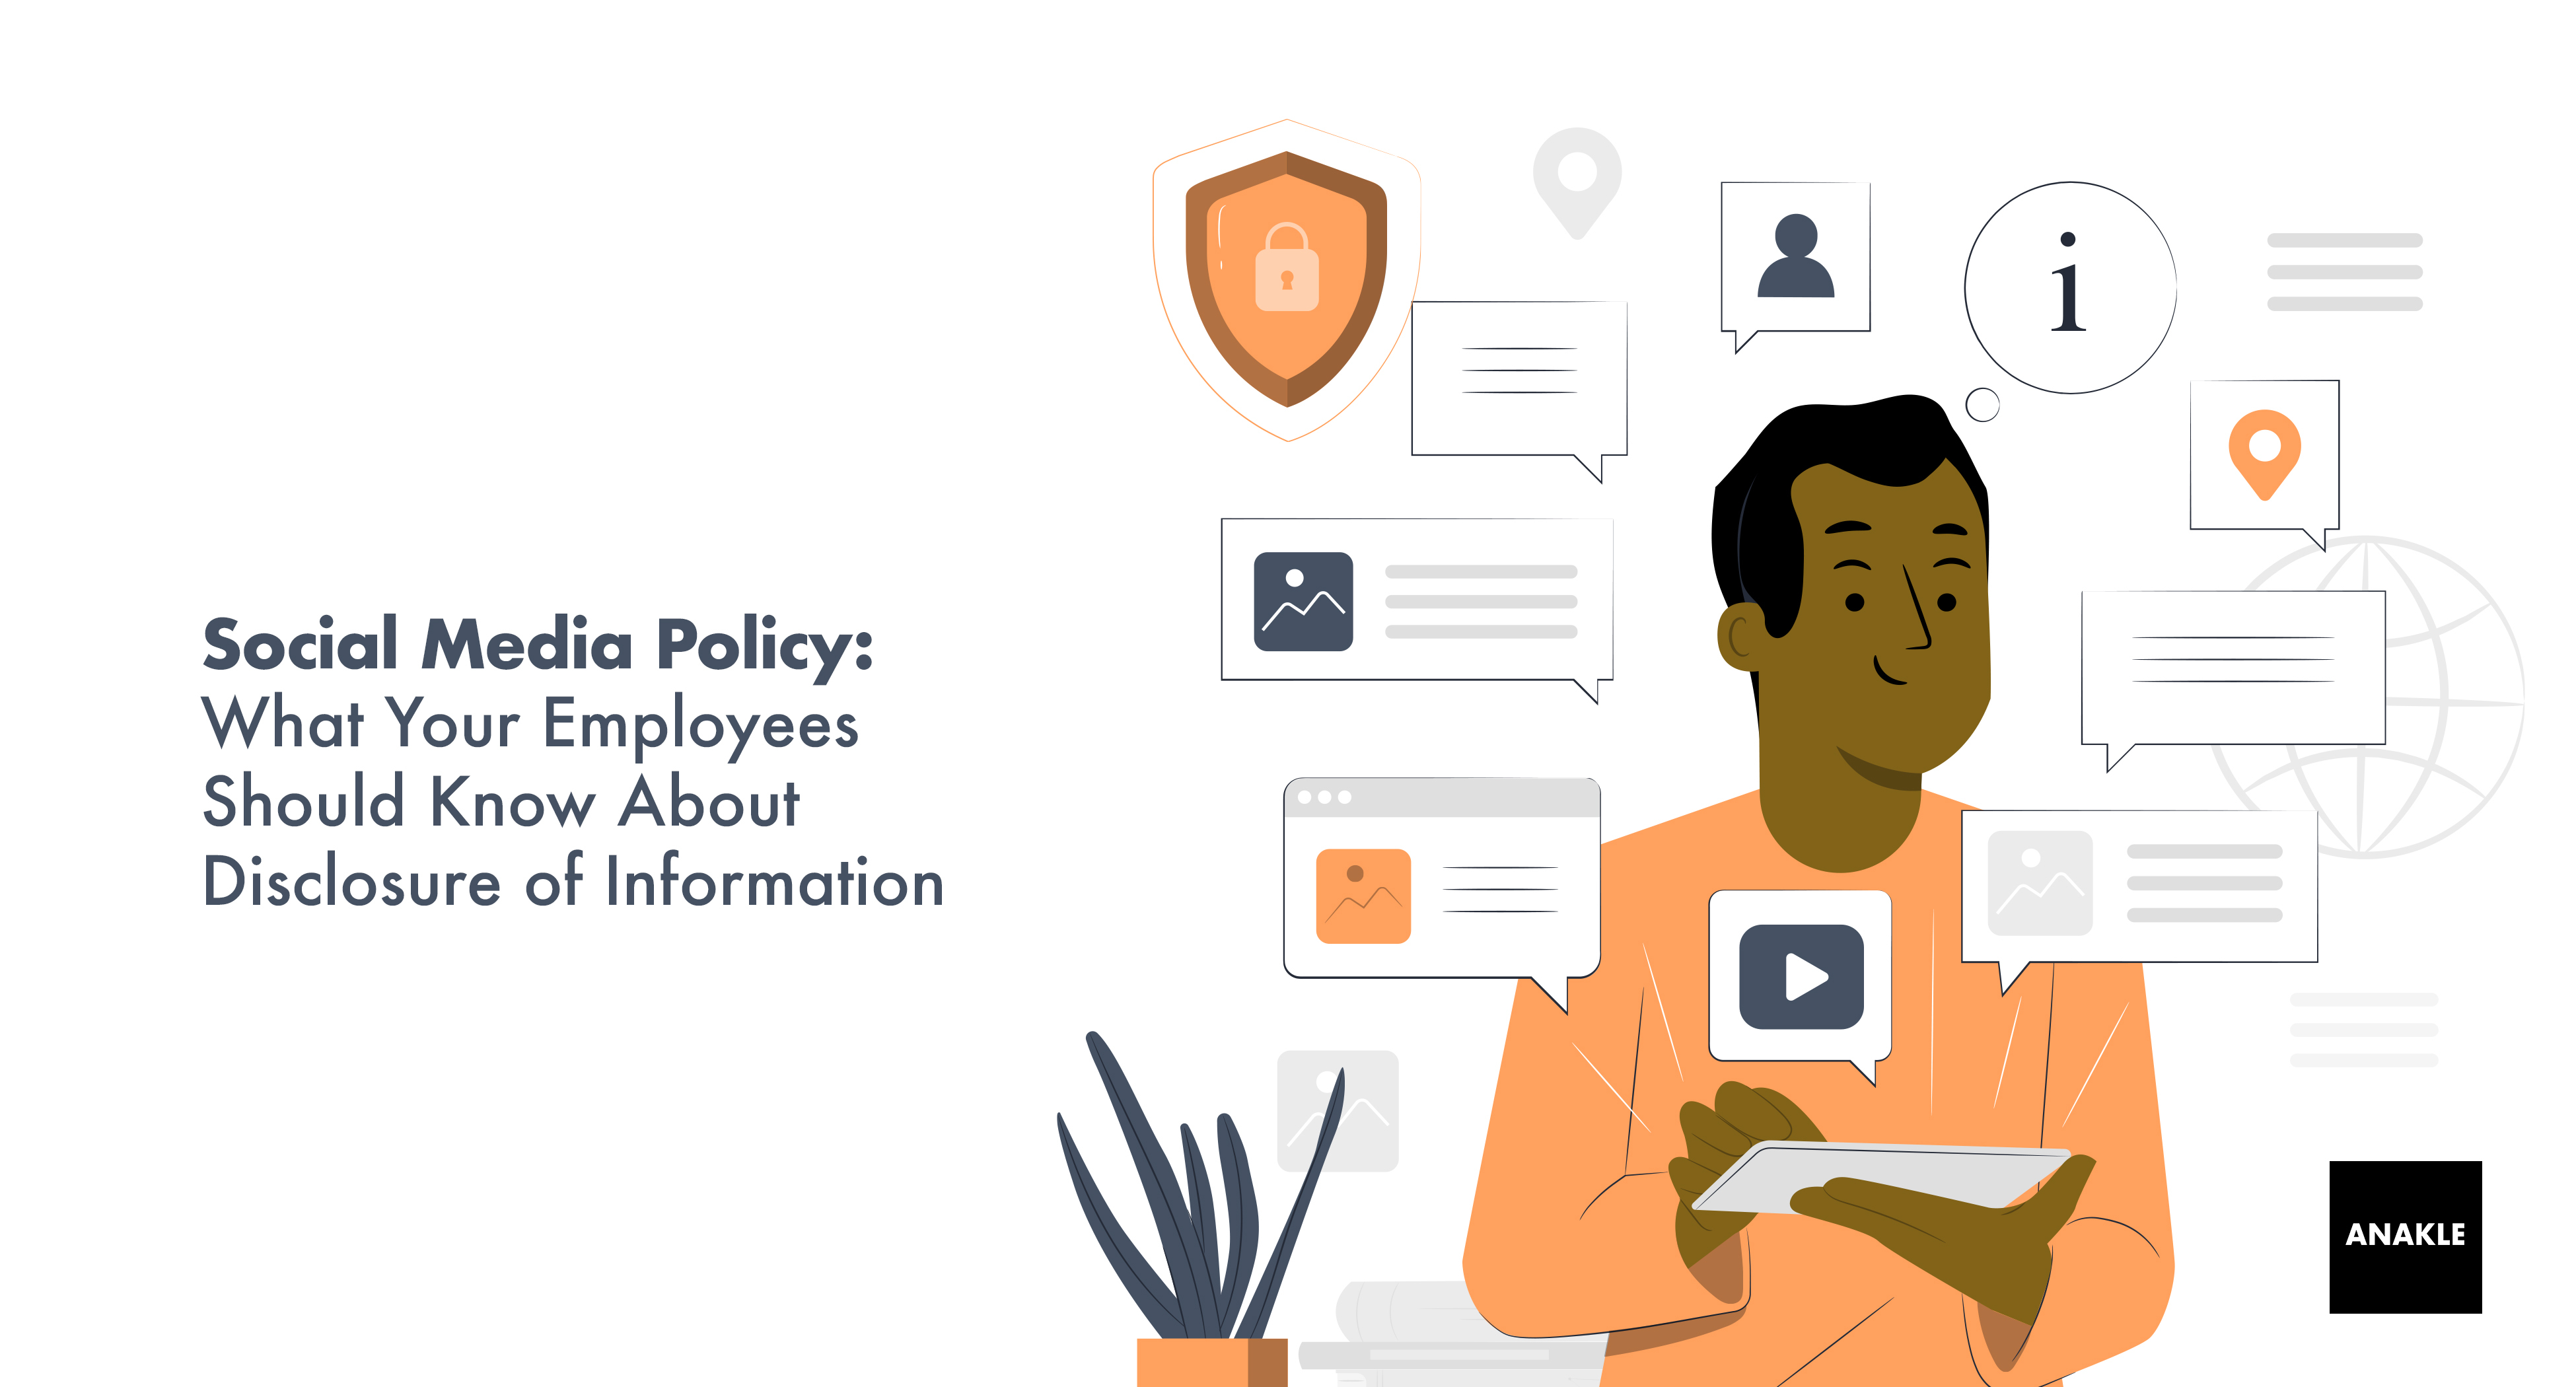 Social Media Policy: What Your Employees Should Know About Disclosure of Information